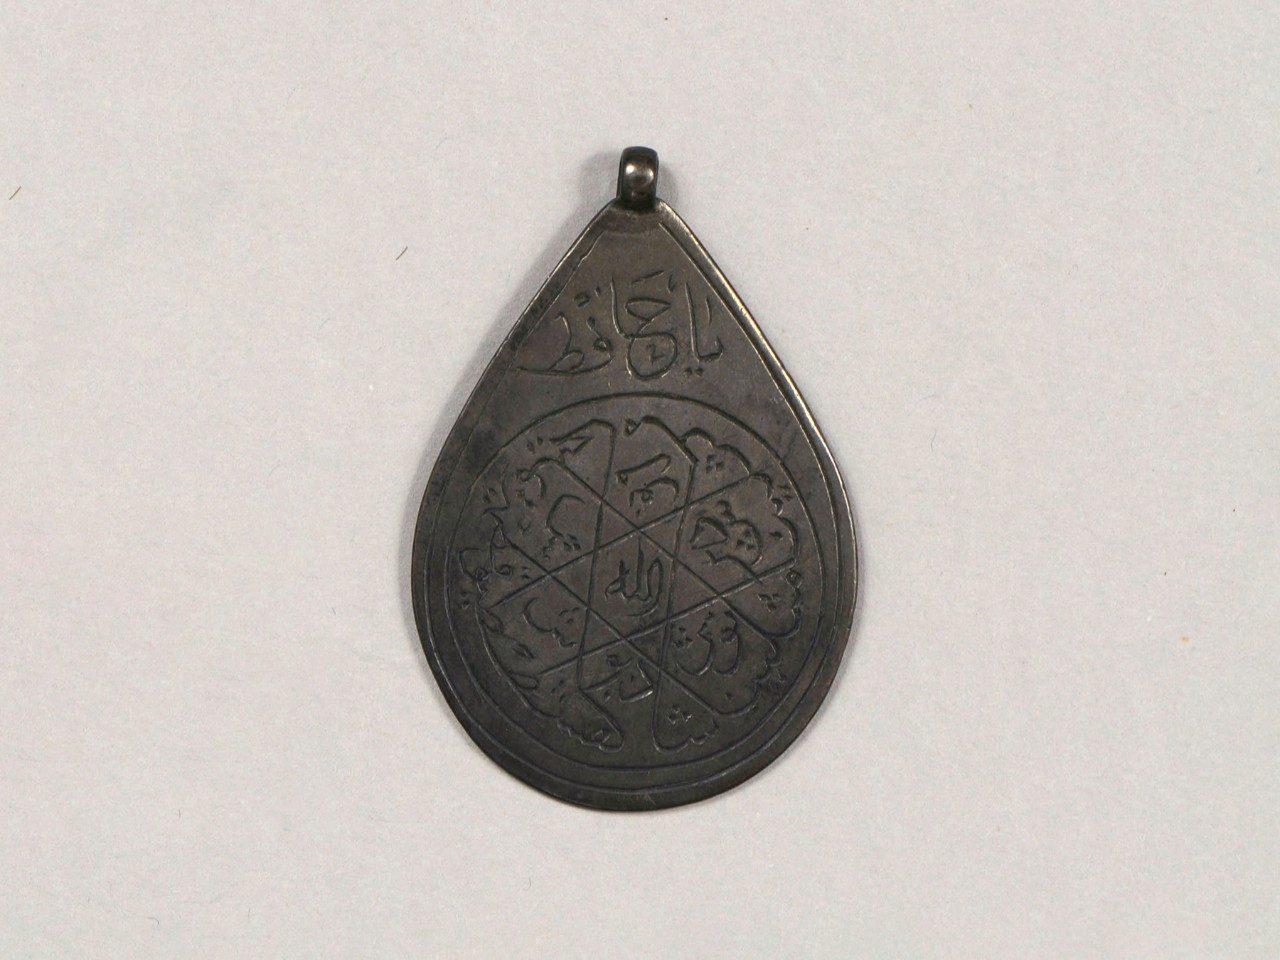 Teardrop-shaped amulet with a suspension loop at its top showing a circle containing Arabic inscriptions.